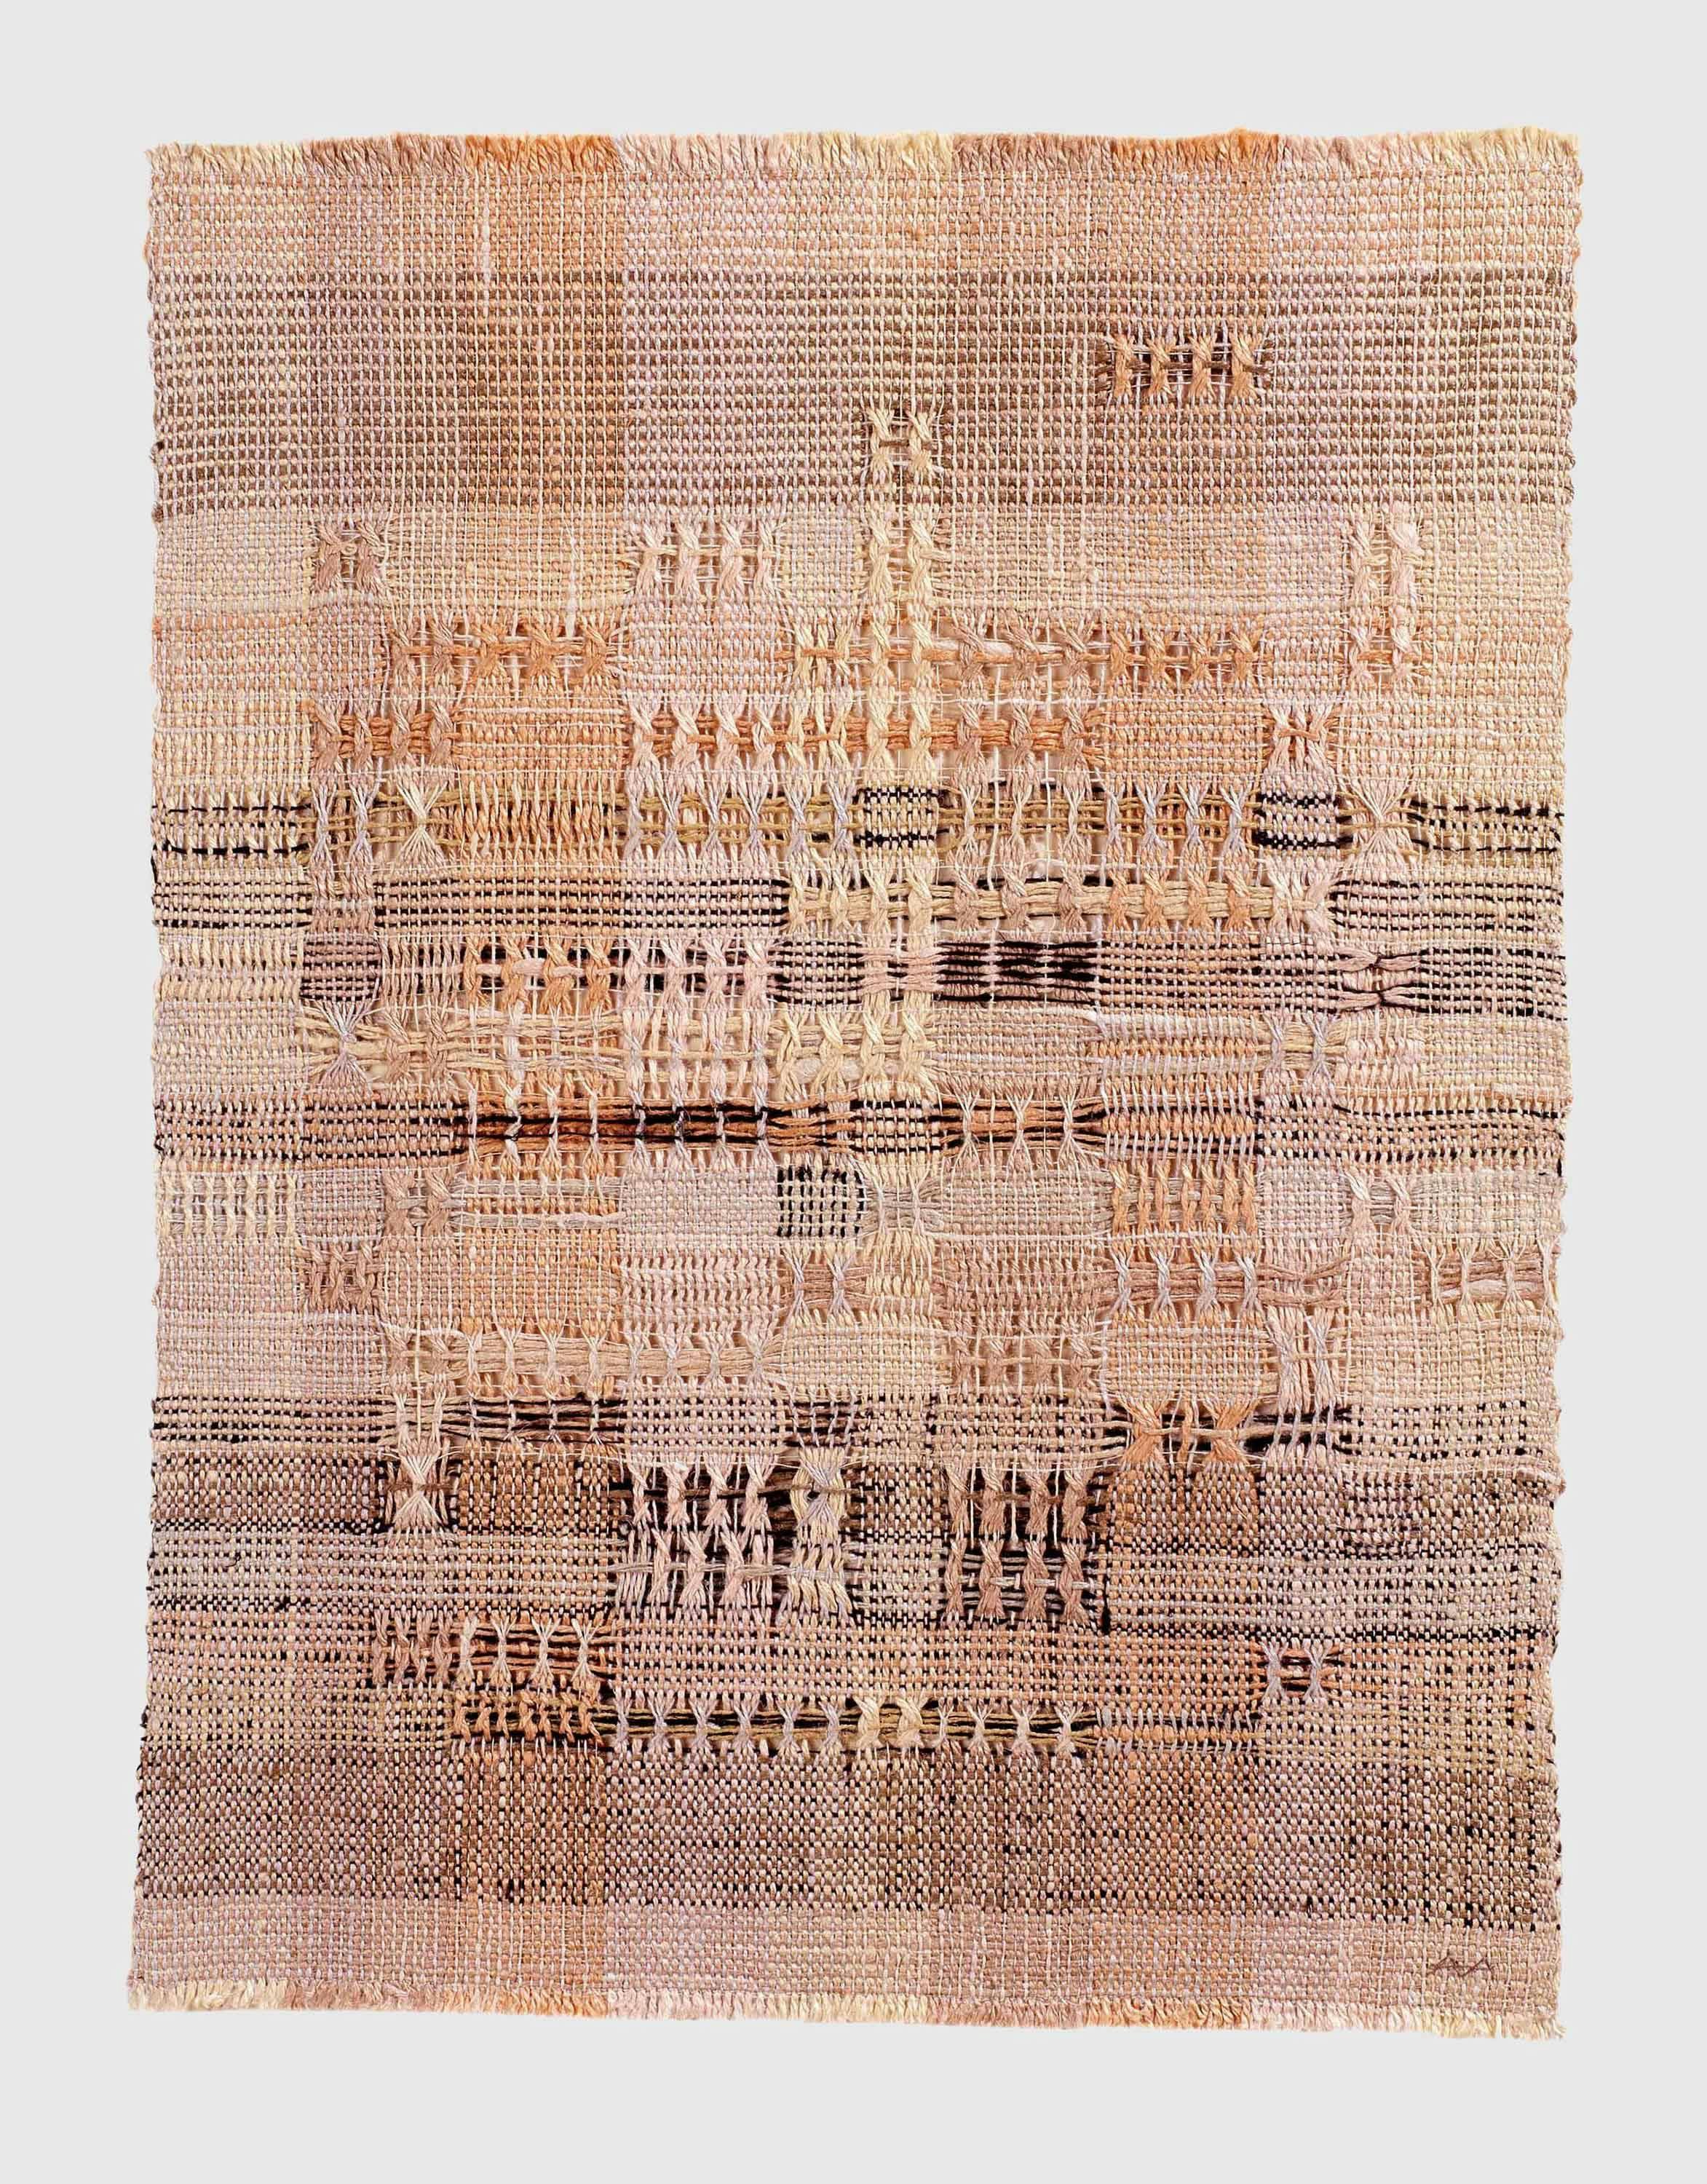 A textile by Anni Albers, titled Development in Rose I, dated 1952.